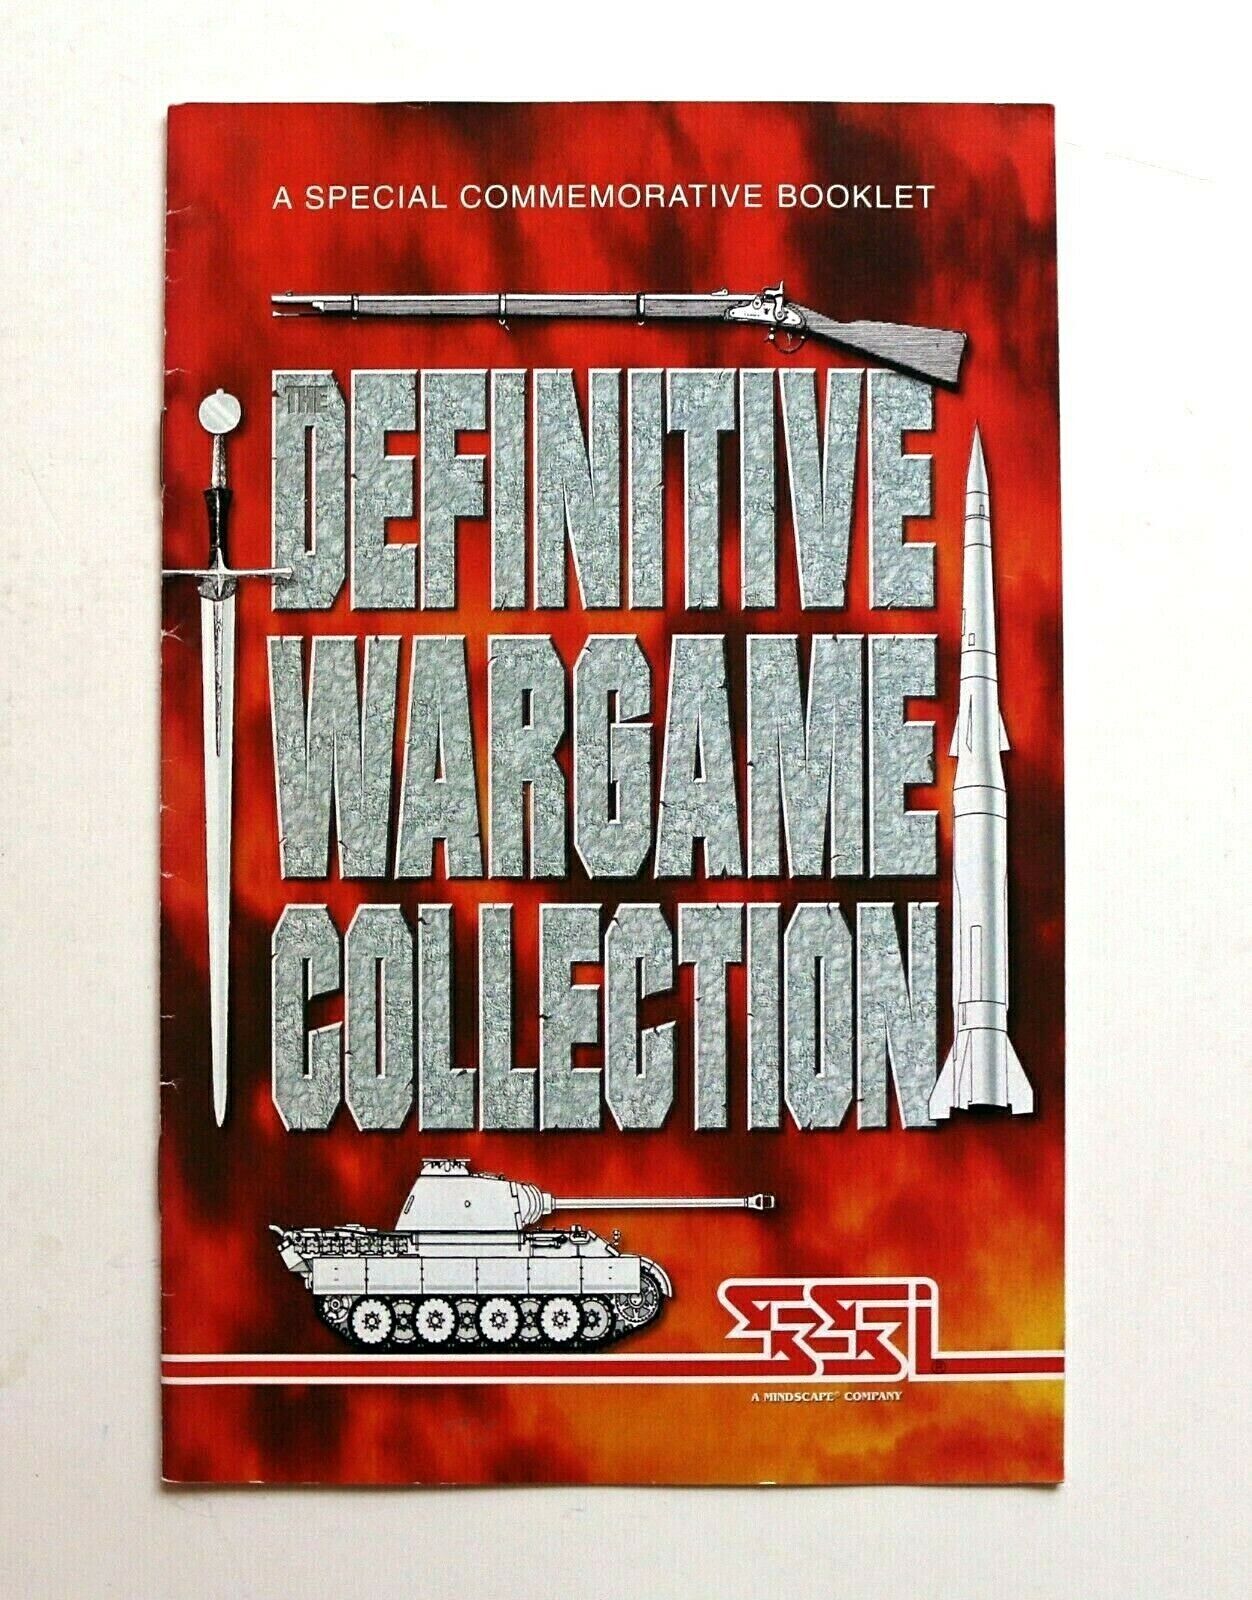 SSI Definitive Wargame Collection Commemorative Booklet